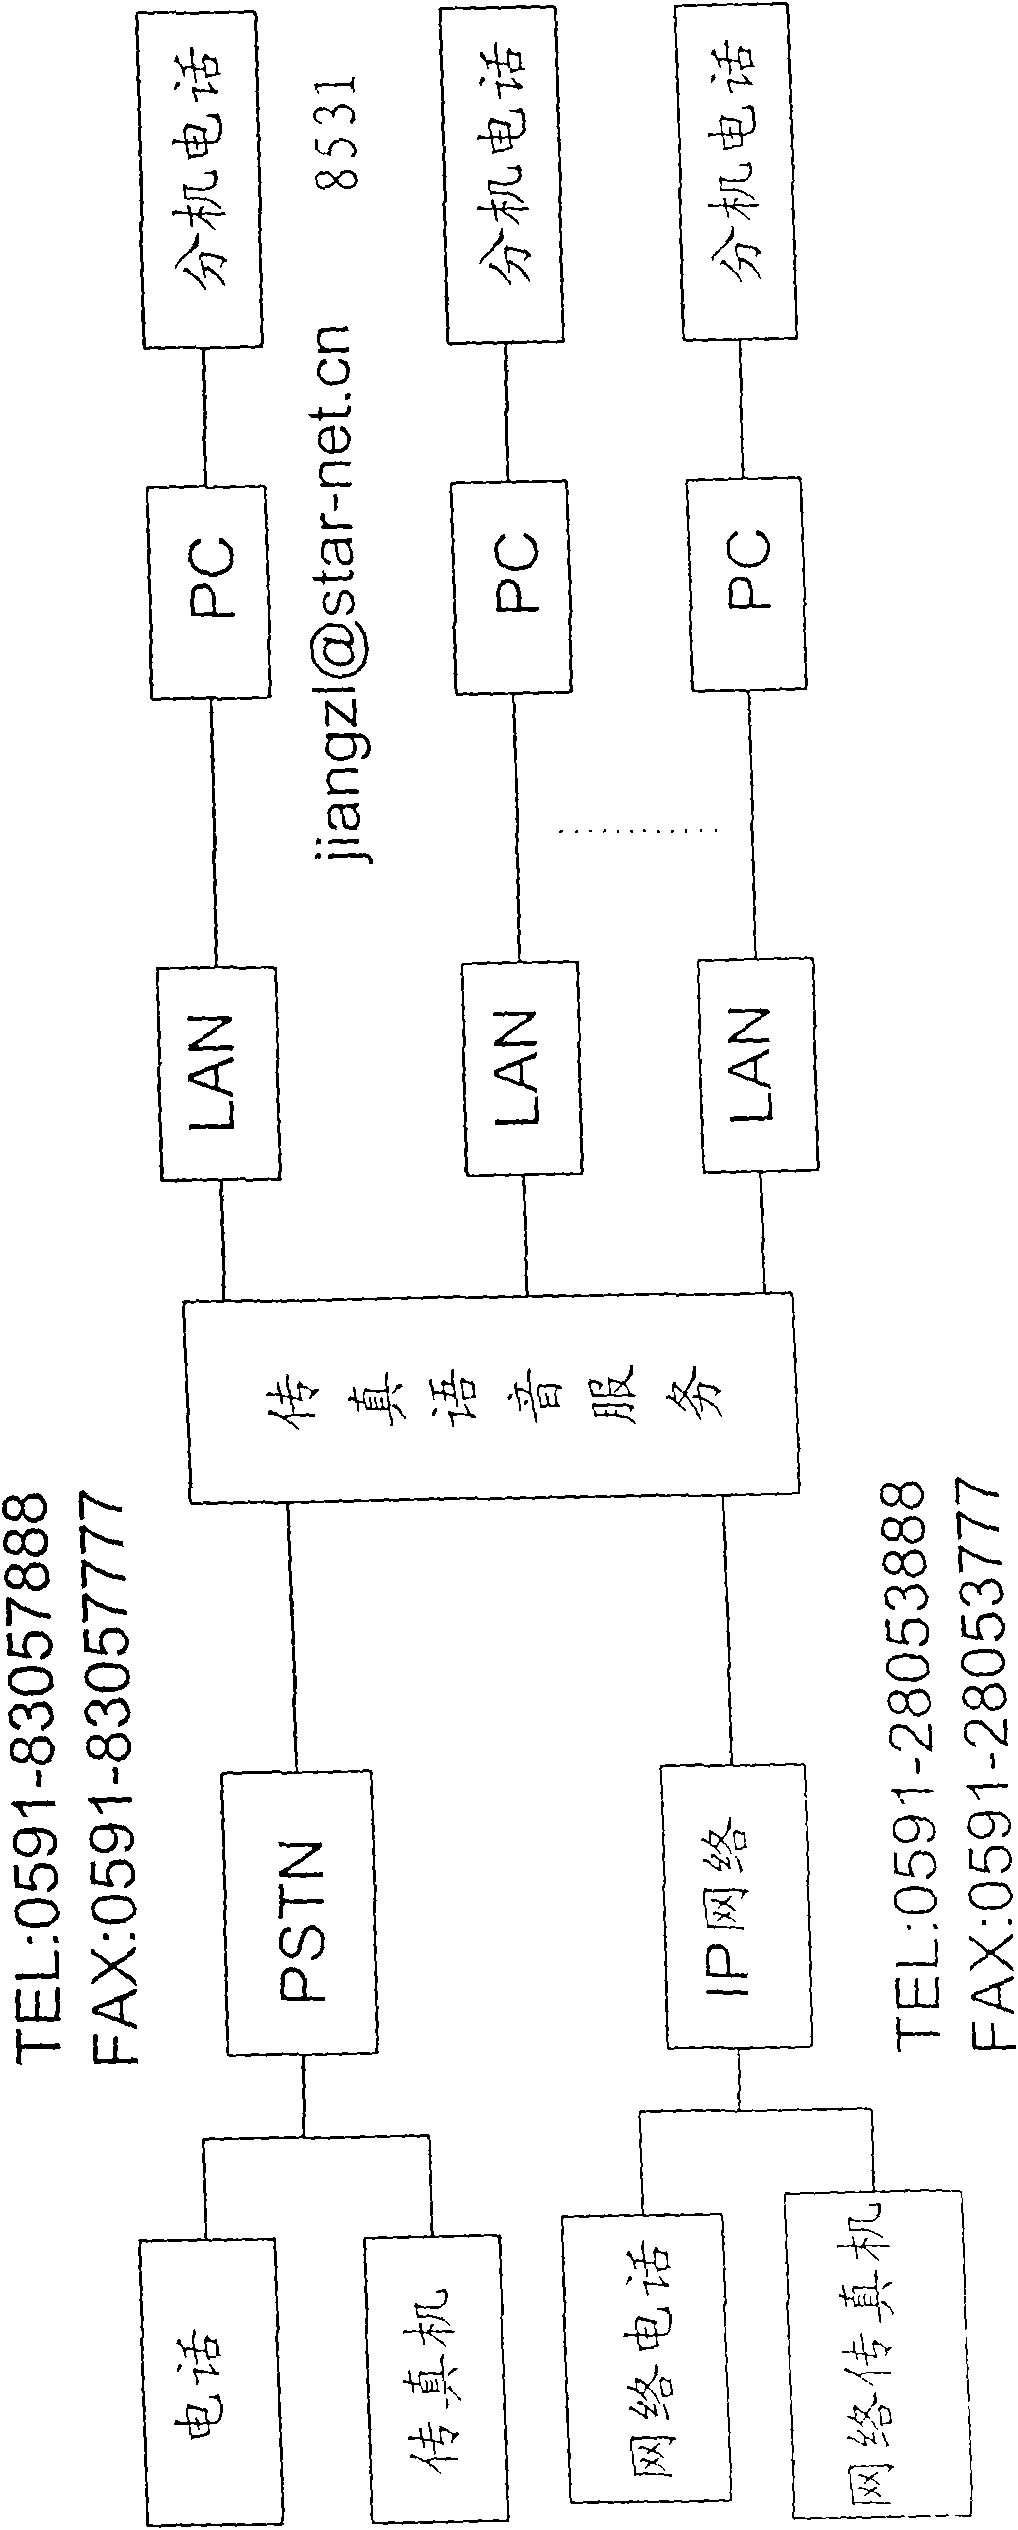 Virtual number faxing method and fax voice server based on same